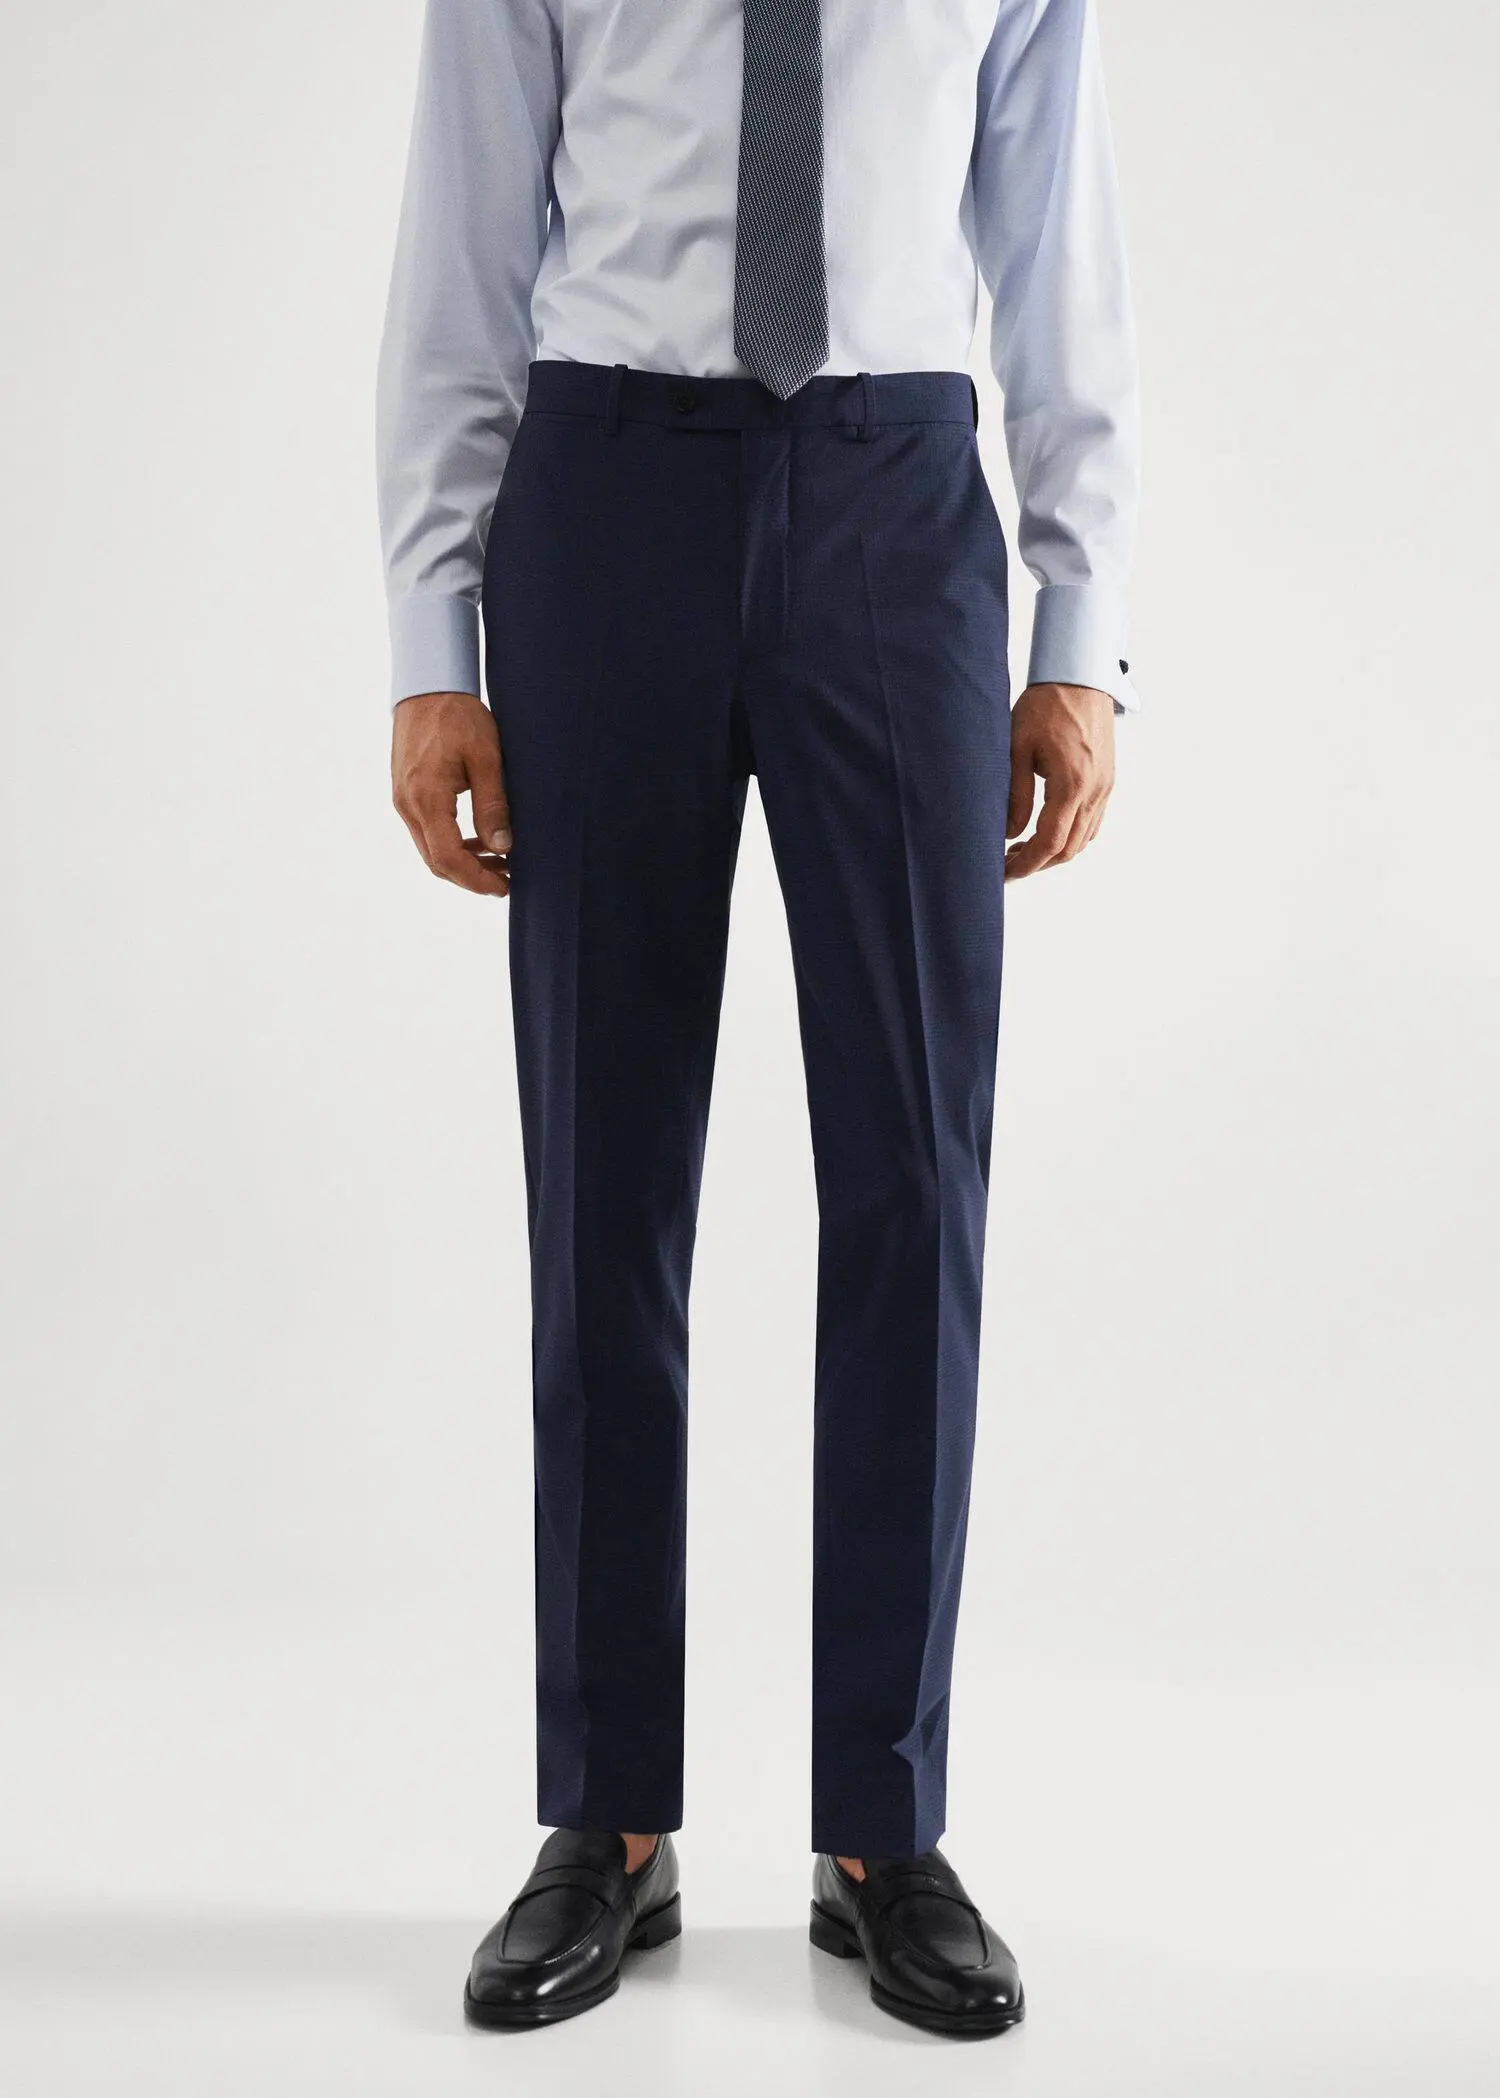 Mango Wool slim-fit check suit trousers. a man wearing a suit and tie standing in front of a white wall. 